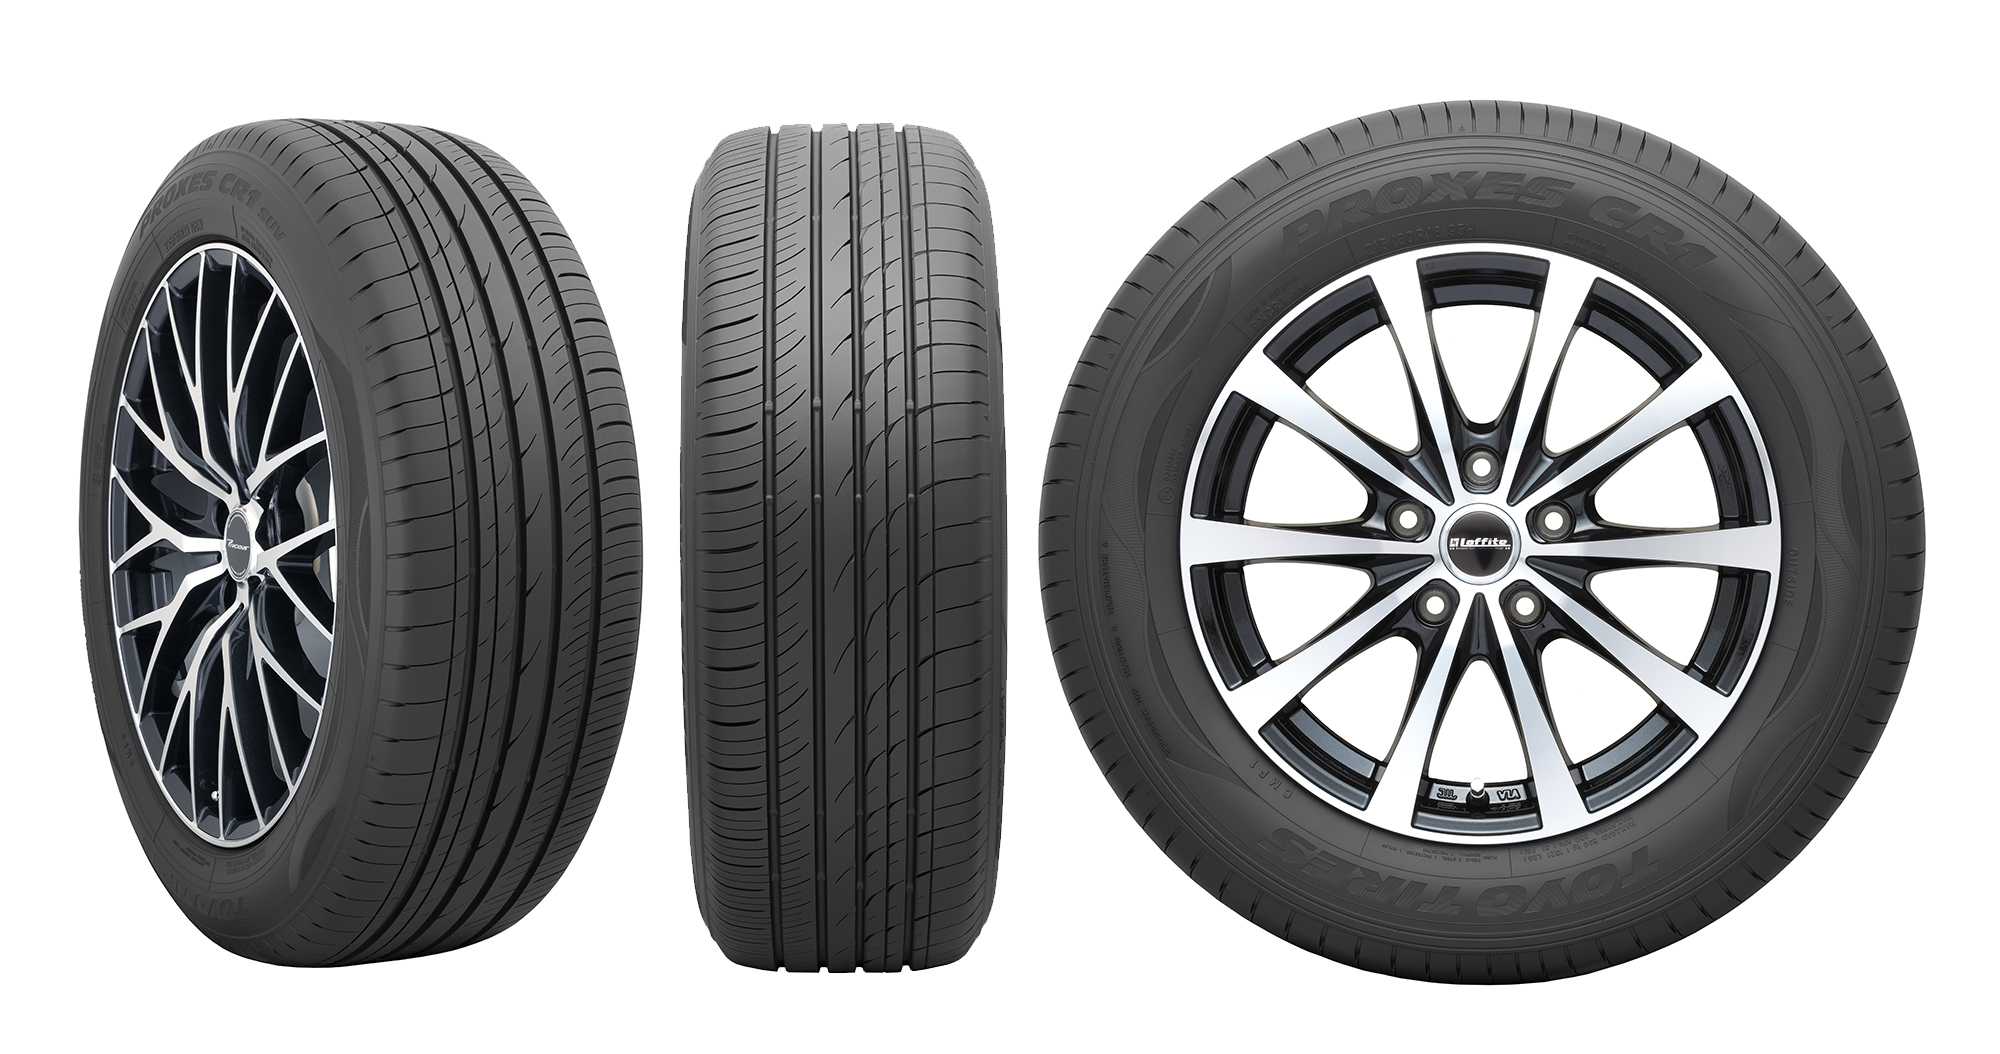 Topgear Toyo Proxes Cr1 Launched In Malaysia From Rm160 Apiece